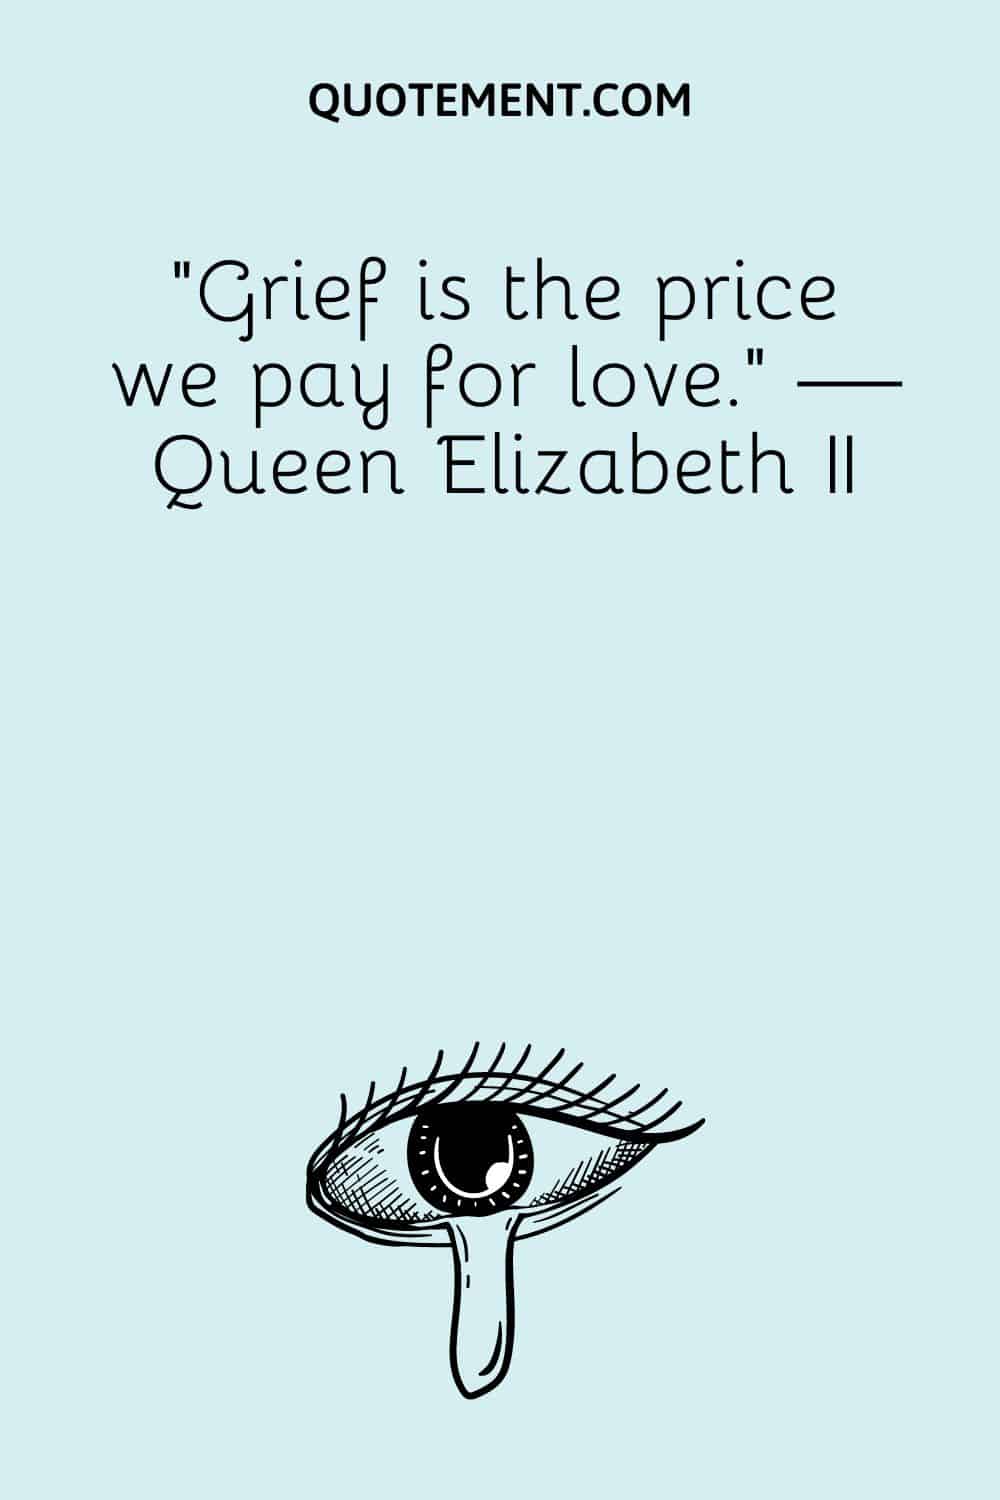 “Grief is the price we pay for love.” — Queen Elizabeth II